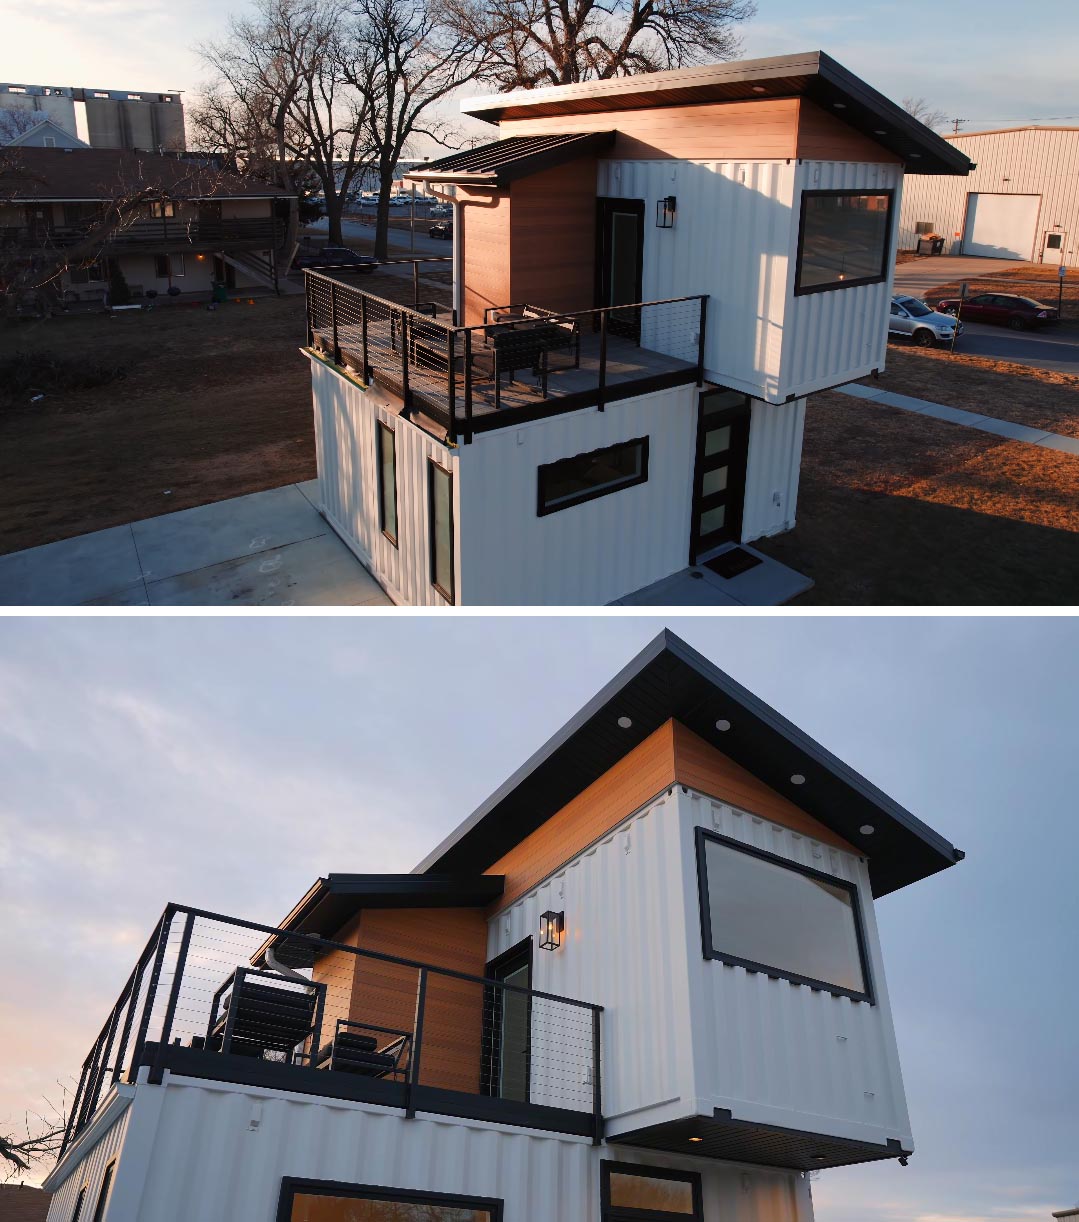 This tiny house made from shipping containers, has a sloped roof, and a white exterior that's accented by wood and black frames, giving it a modern yet welcoming appearance.